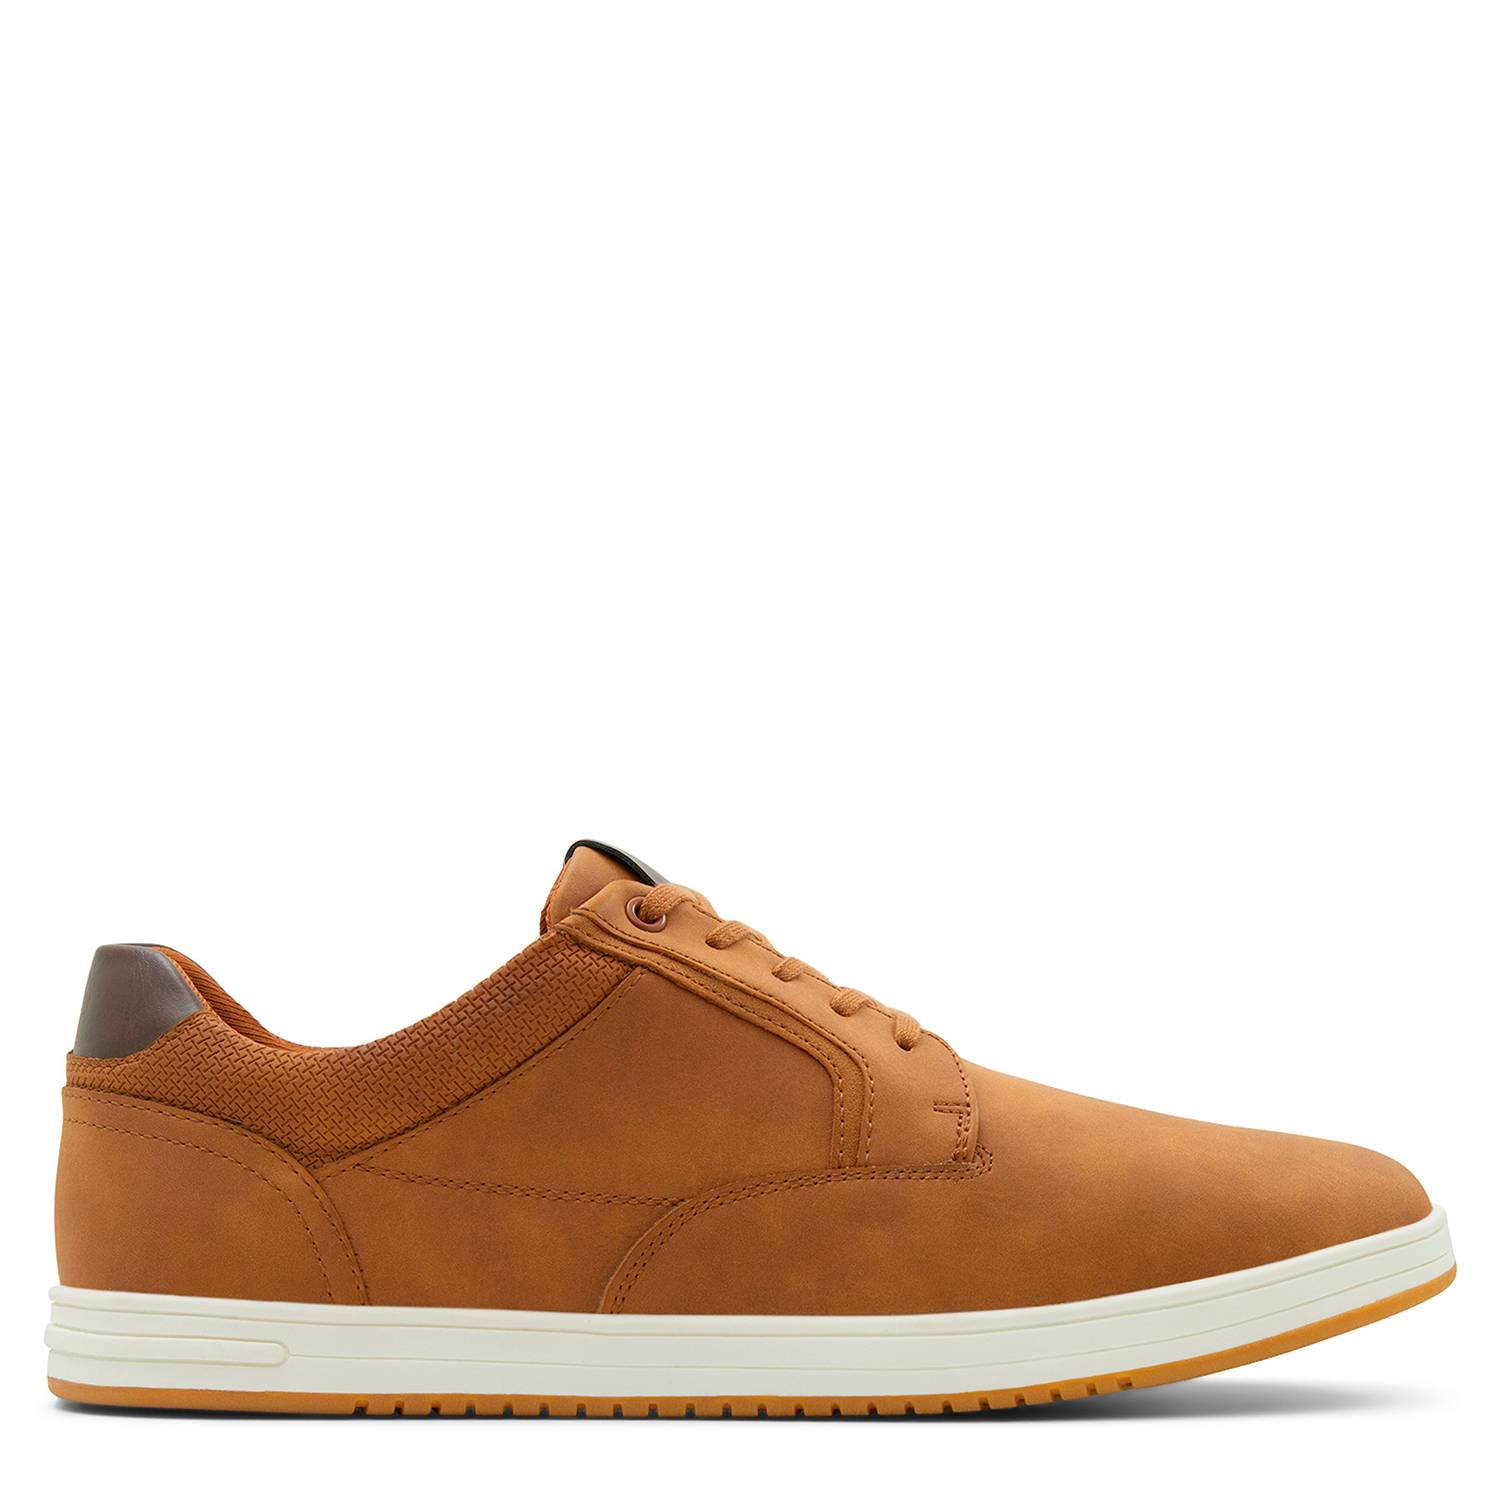 Zapatos casuales Hombre Marcel Call It Spring CALL IT SPRING